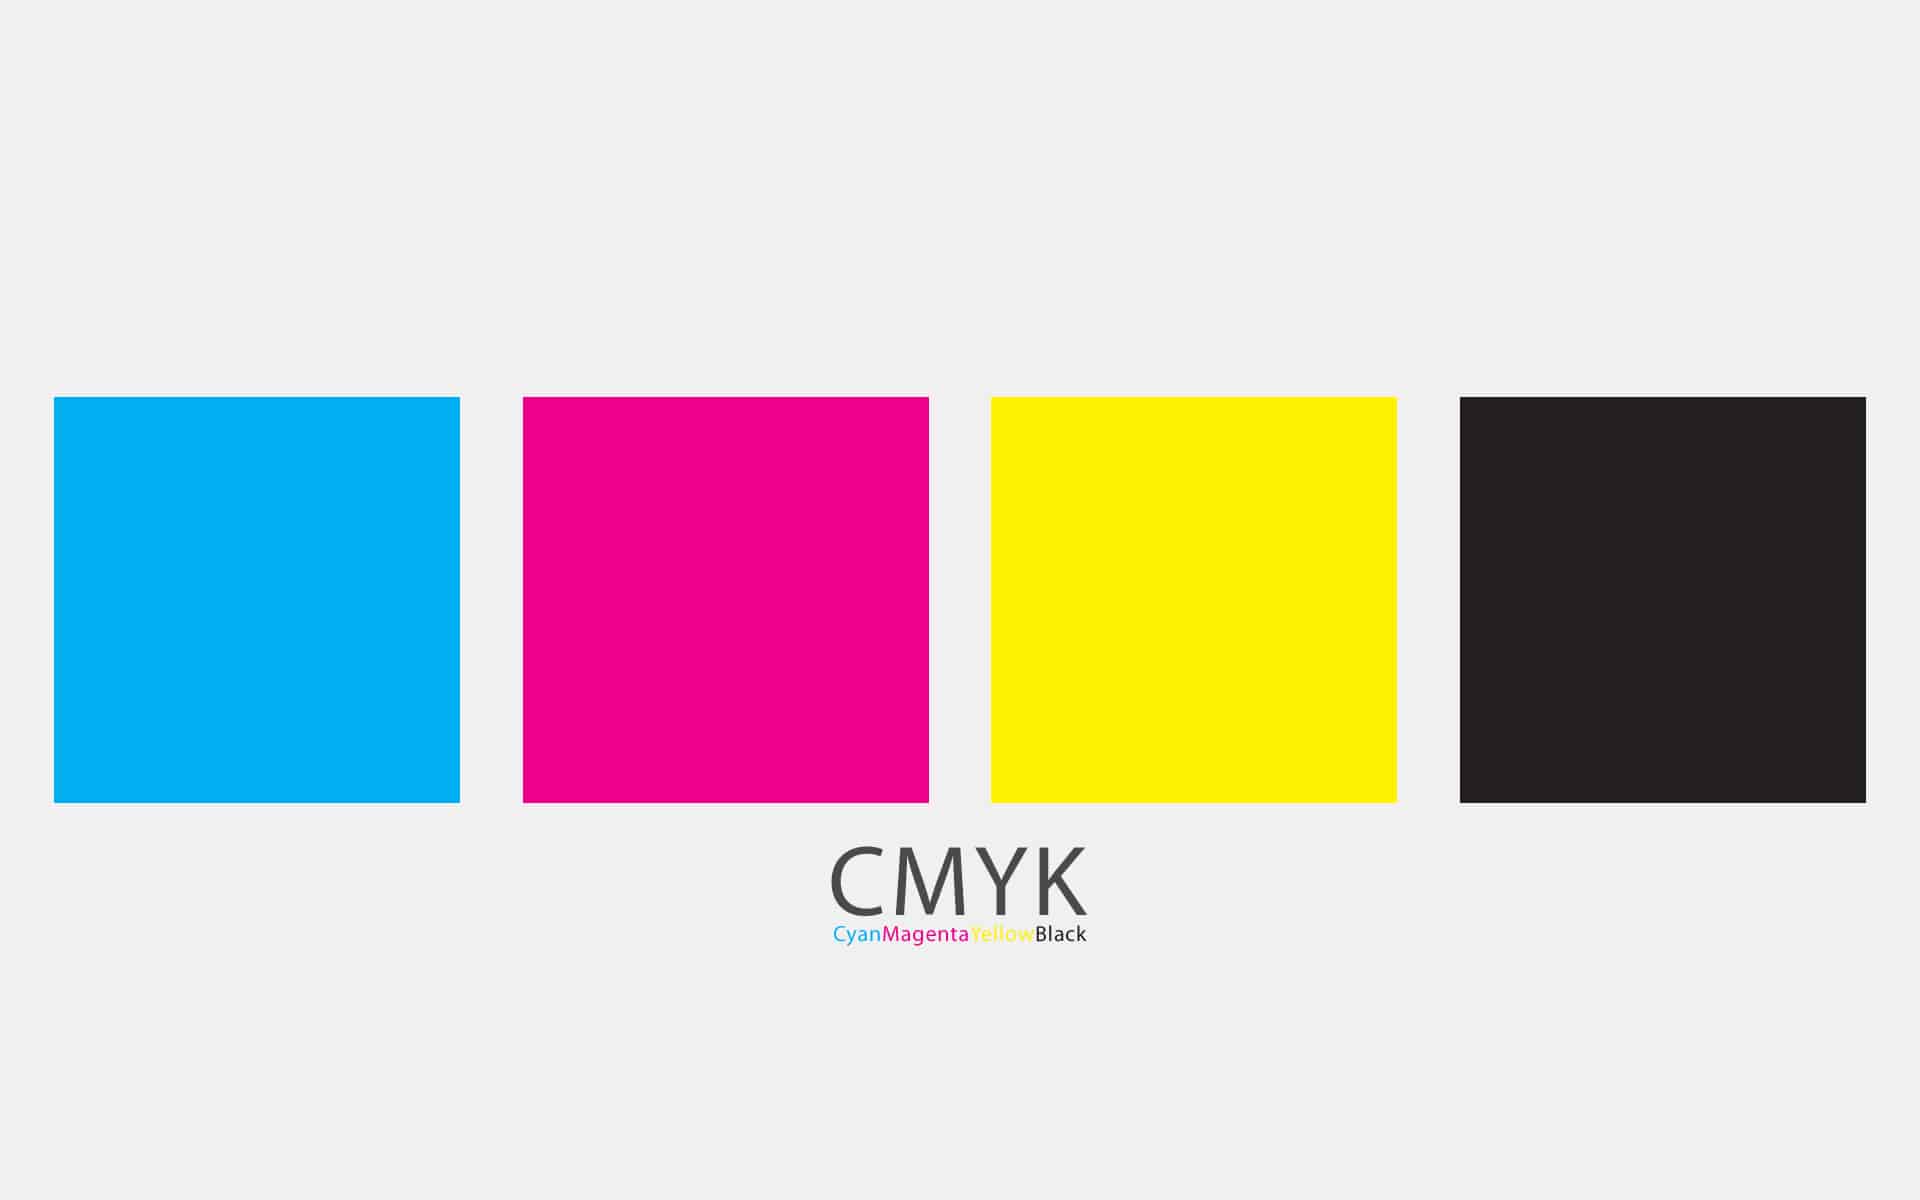 If You Have Any Questions About Cmyk Colours Or Full - Cmyk Printing Mark , HD Wallpaper & Backgrounds